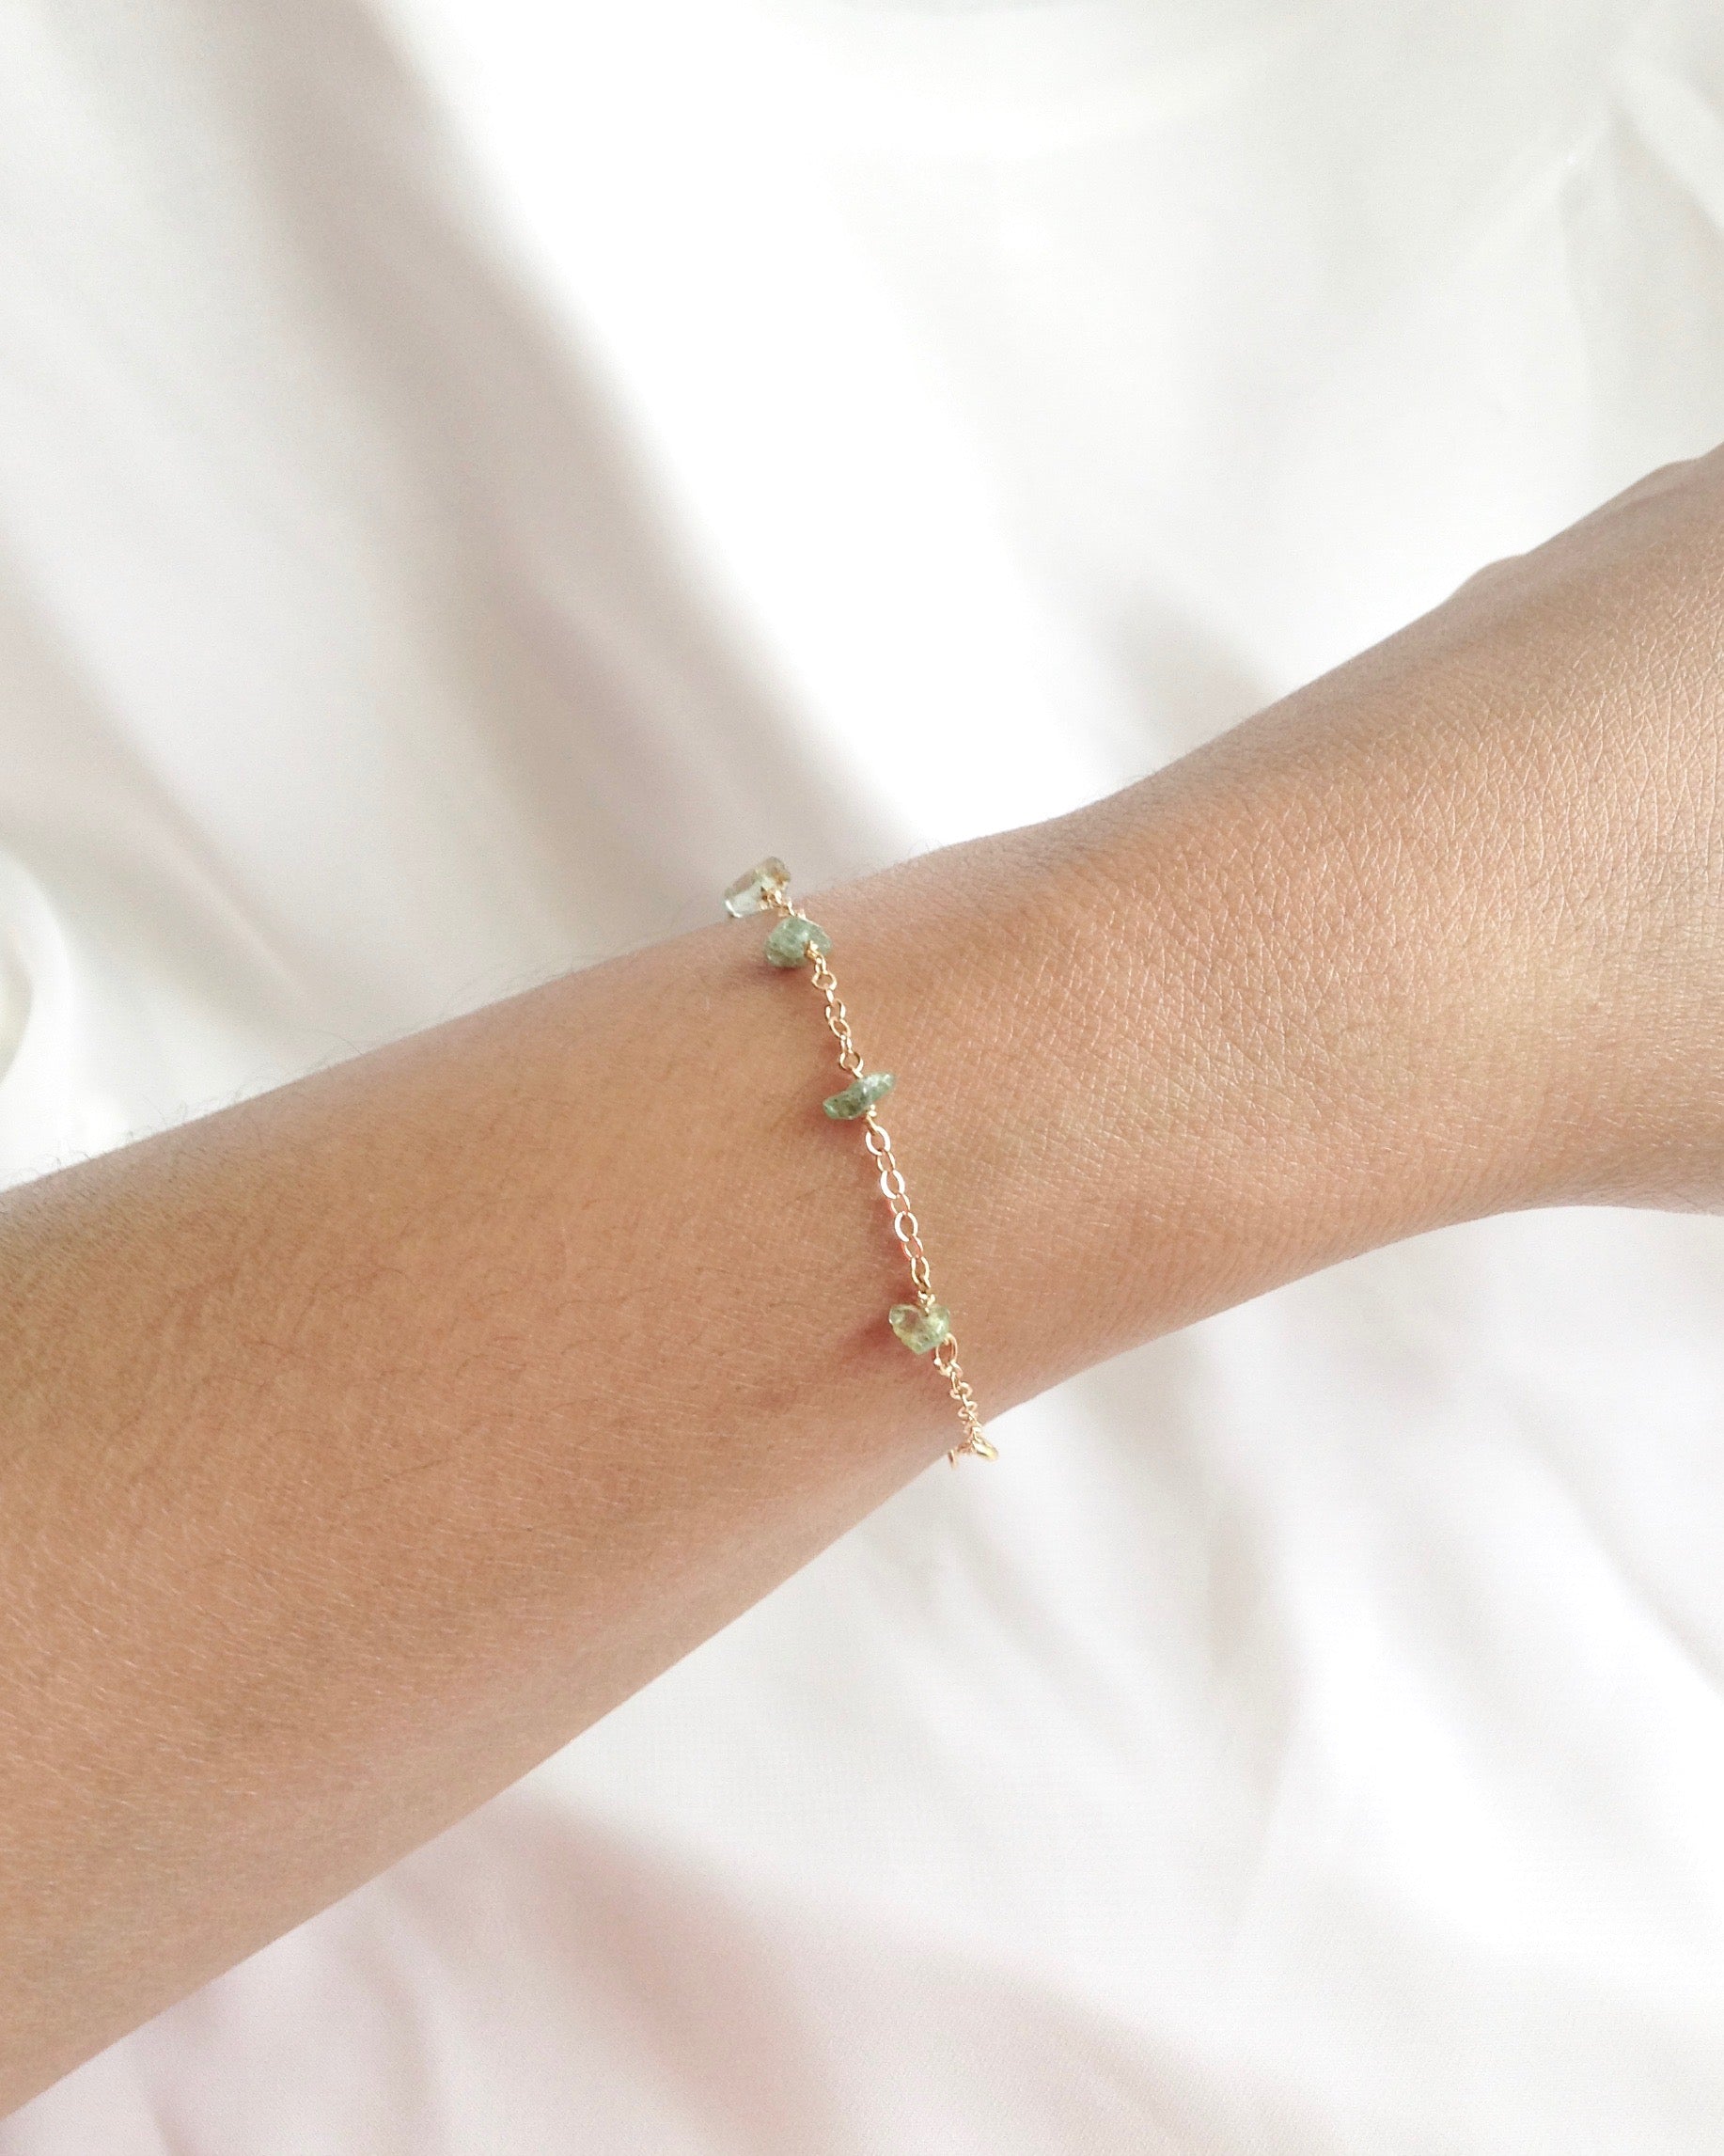 Dainty Emerald Bracelet in Gold Filled or Sterling Silver | IB Jewelry